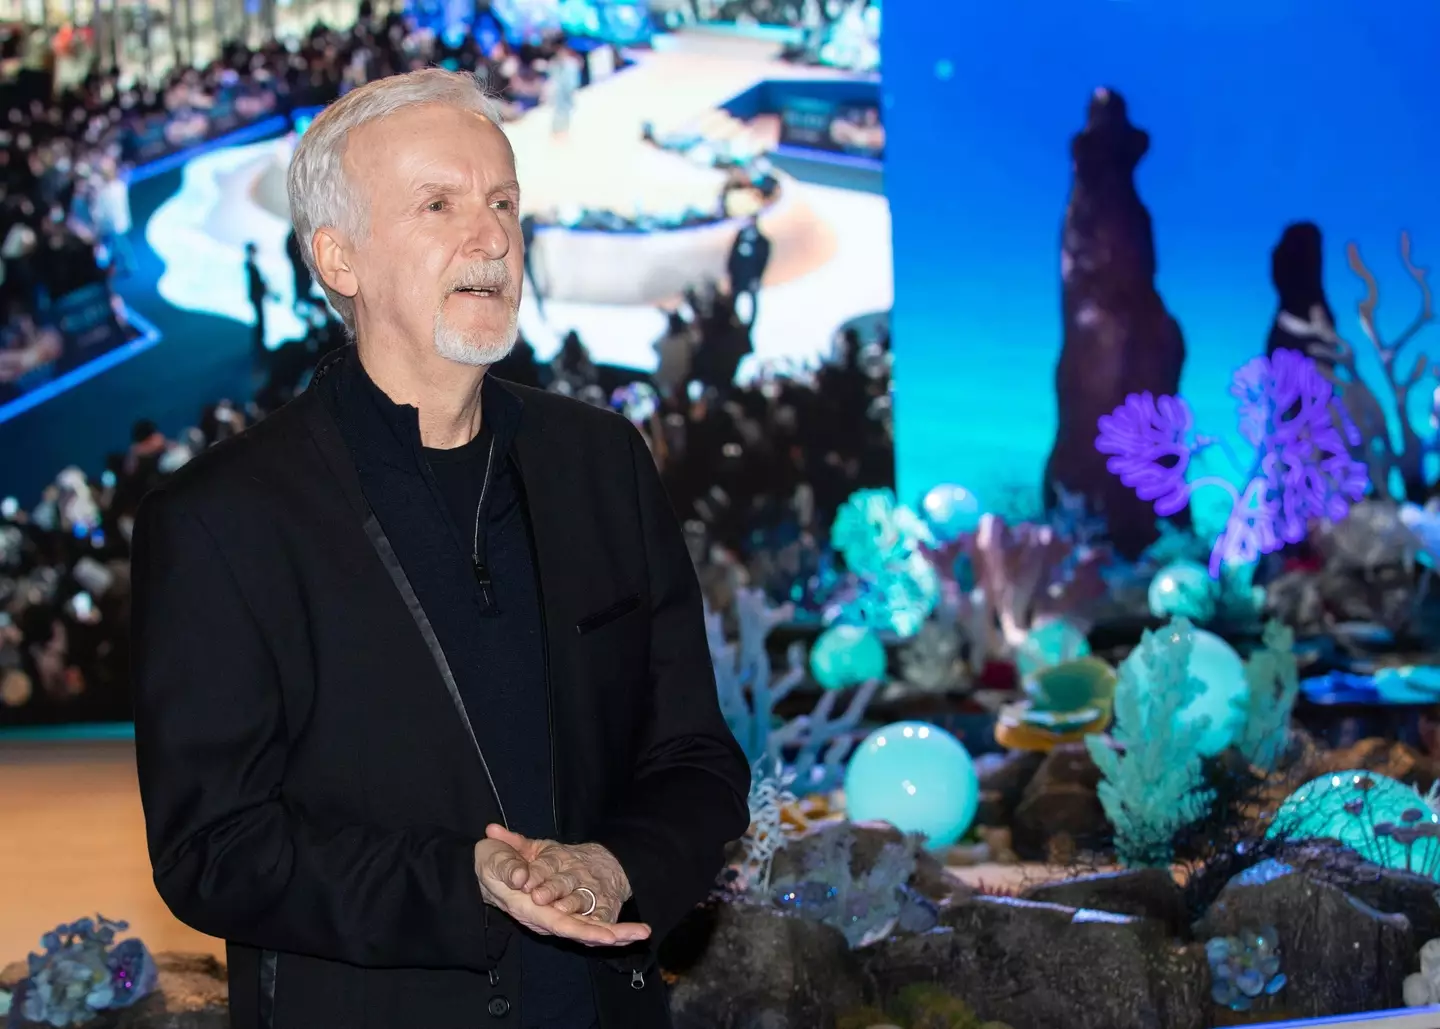 James Cameron promoting The Way of Water in South Korea.